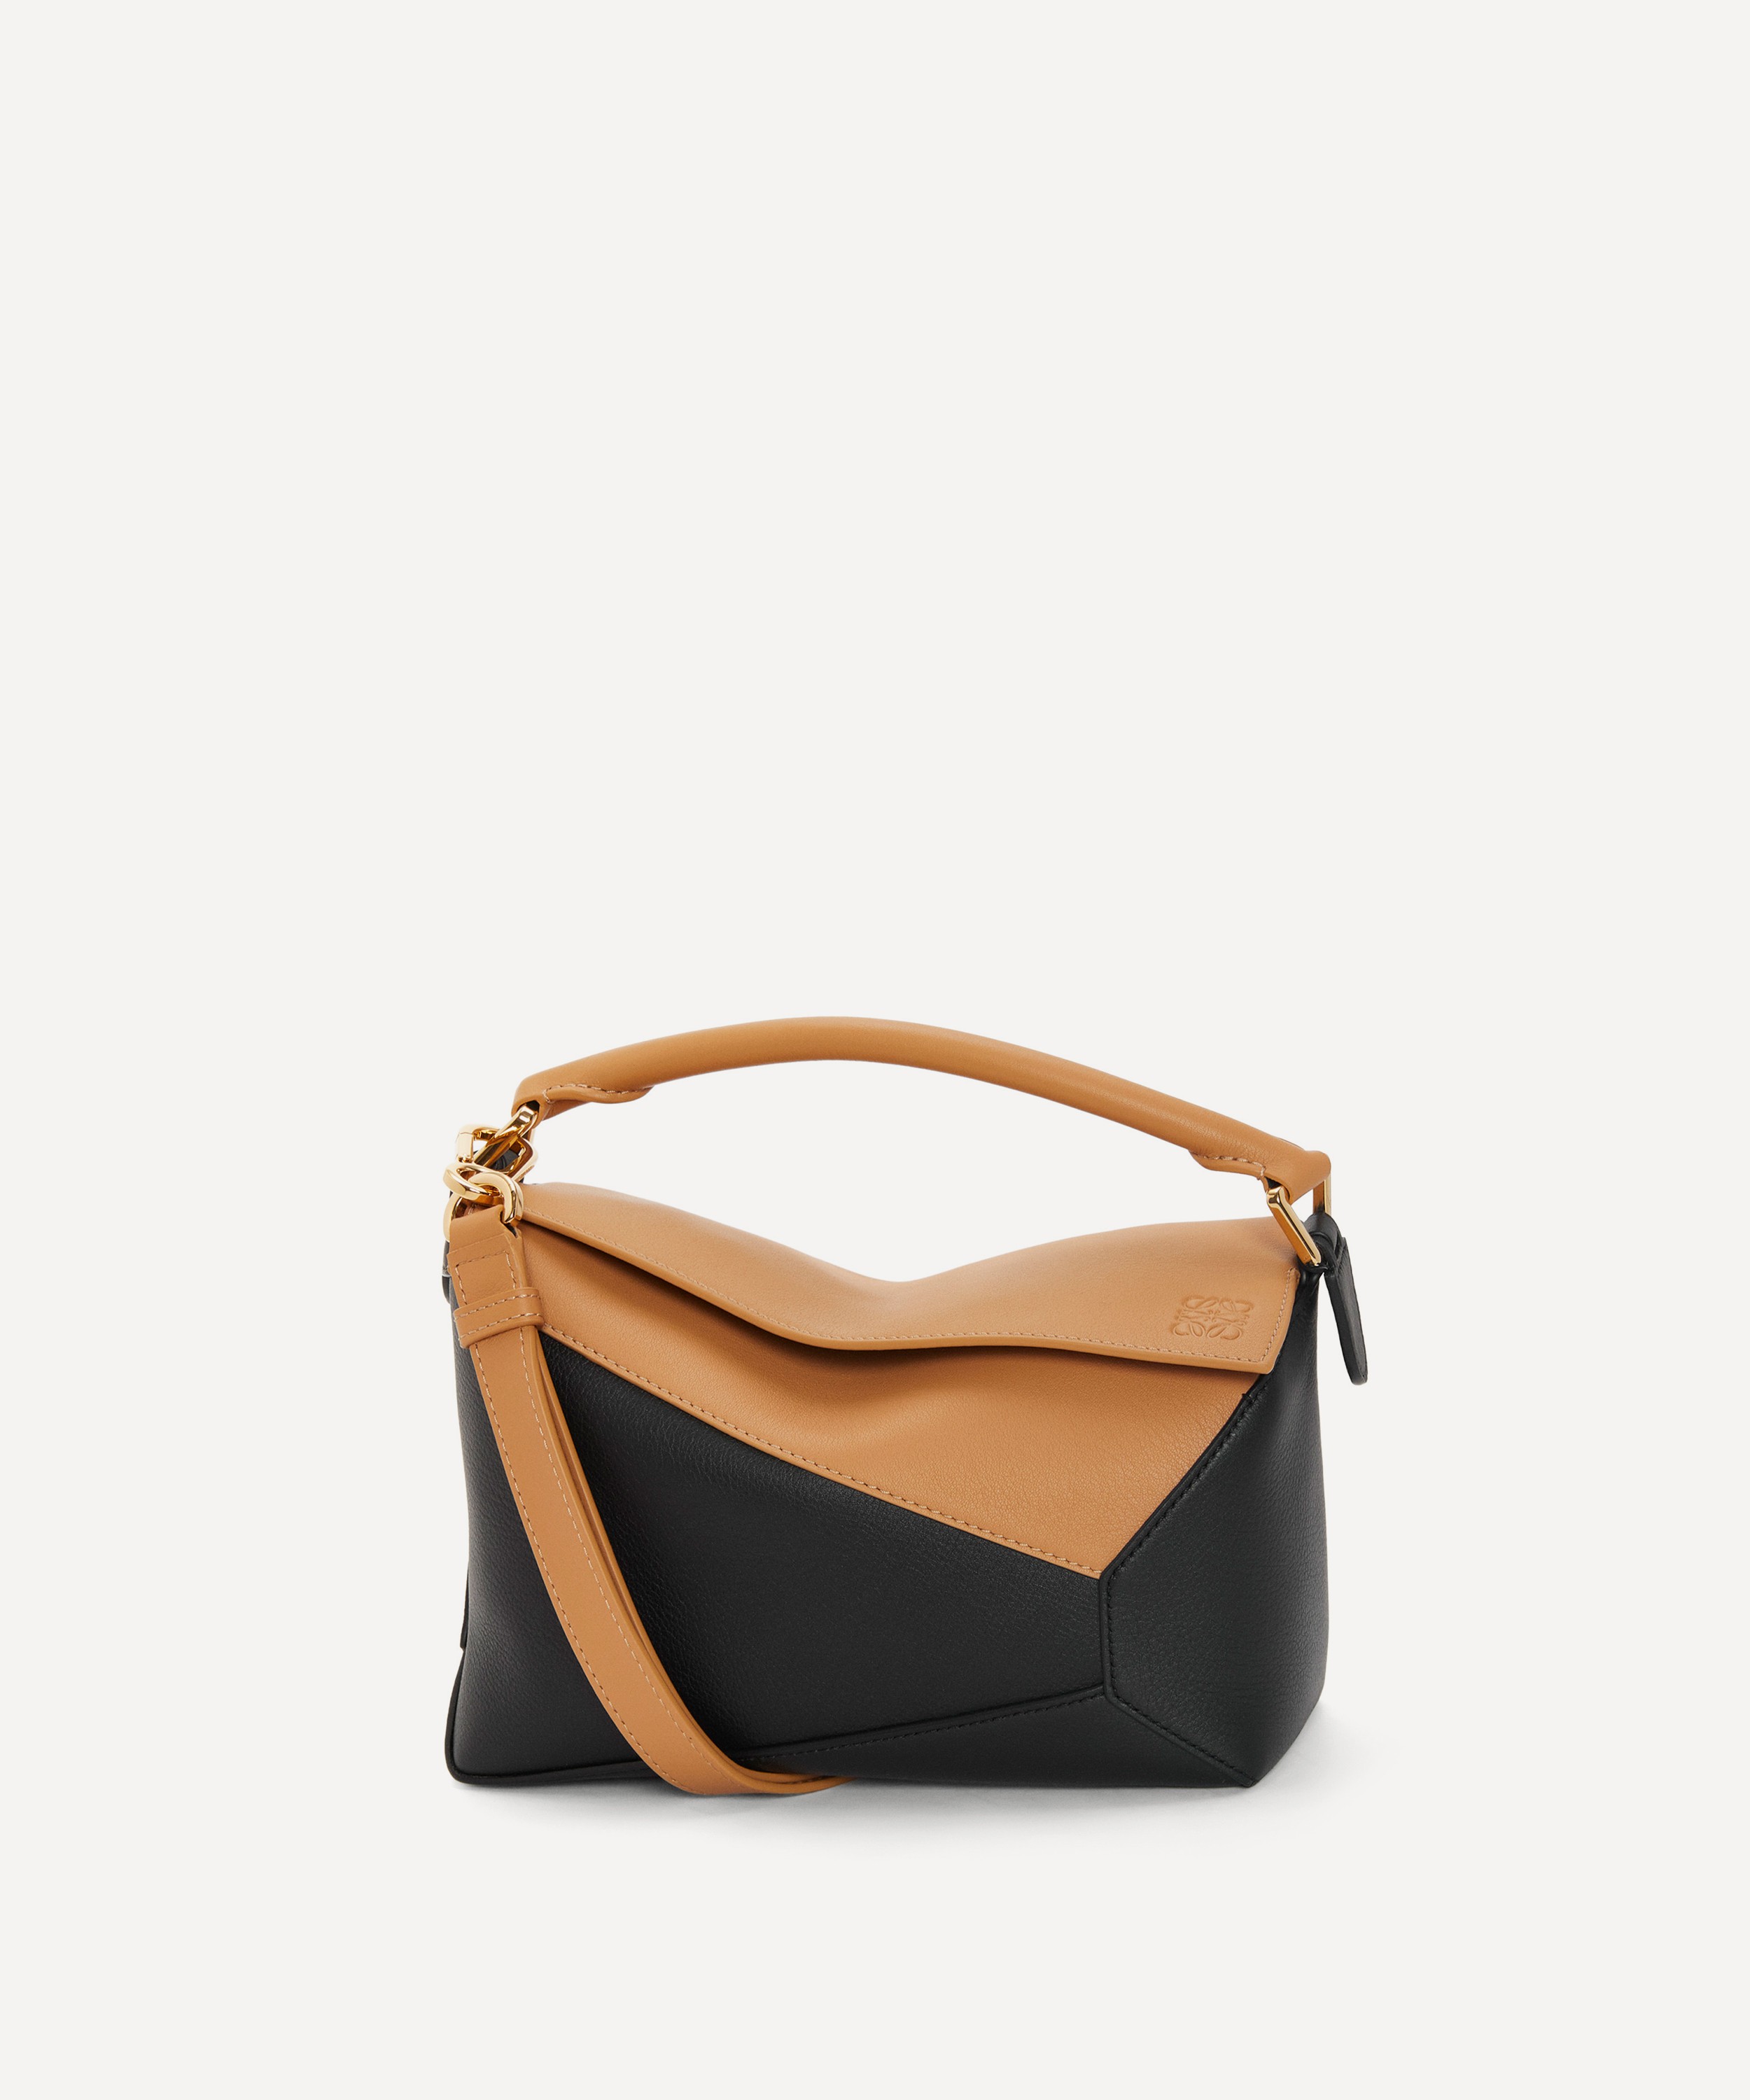 Loewe Women's Small Puzzle Leather Shoulder Bag